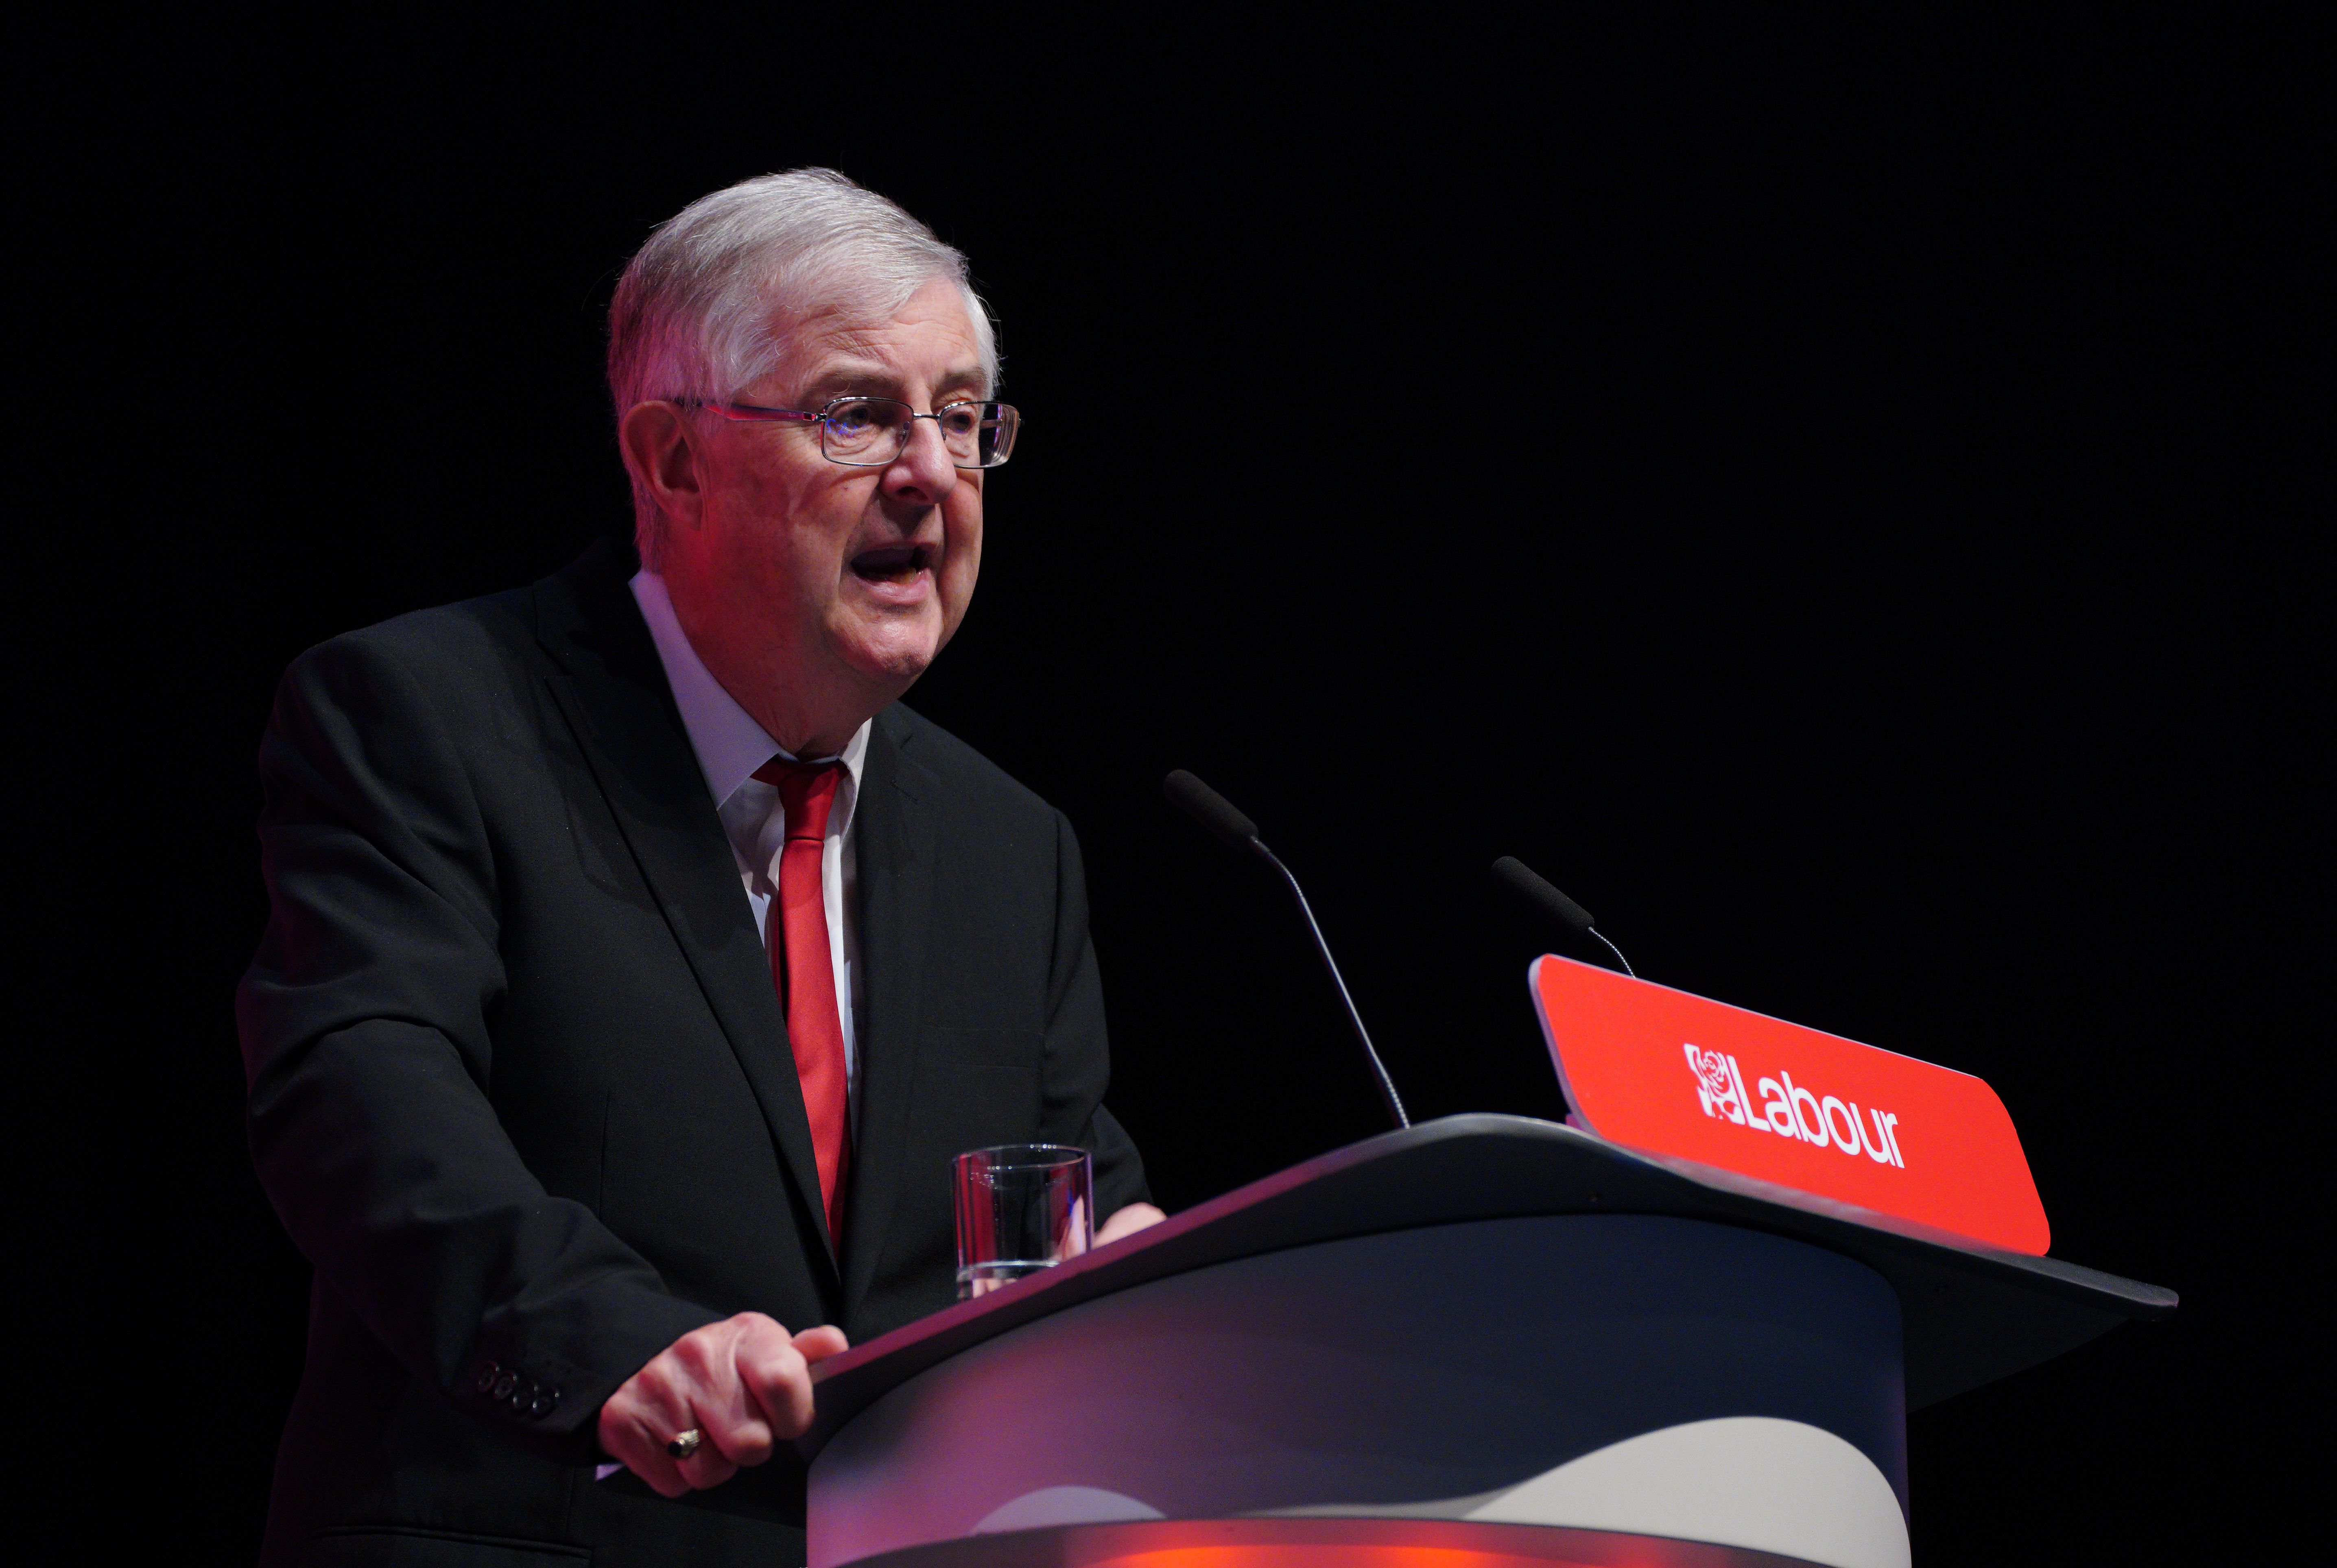 Mark Drakeford had spoken of his desire to keep his family out of the public eye